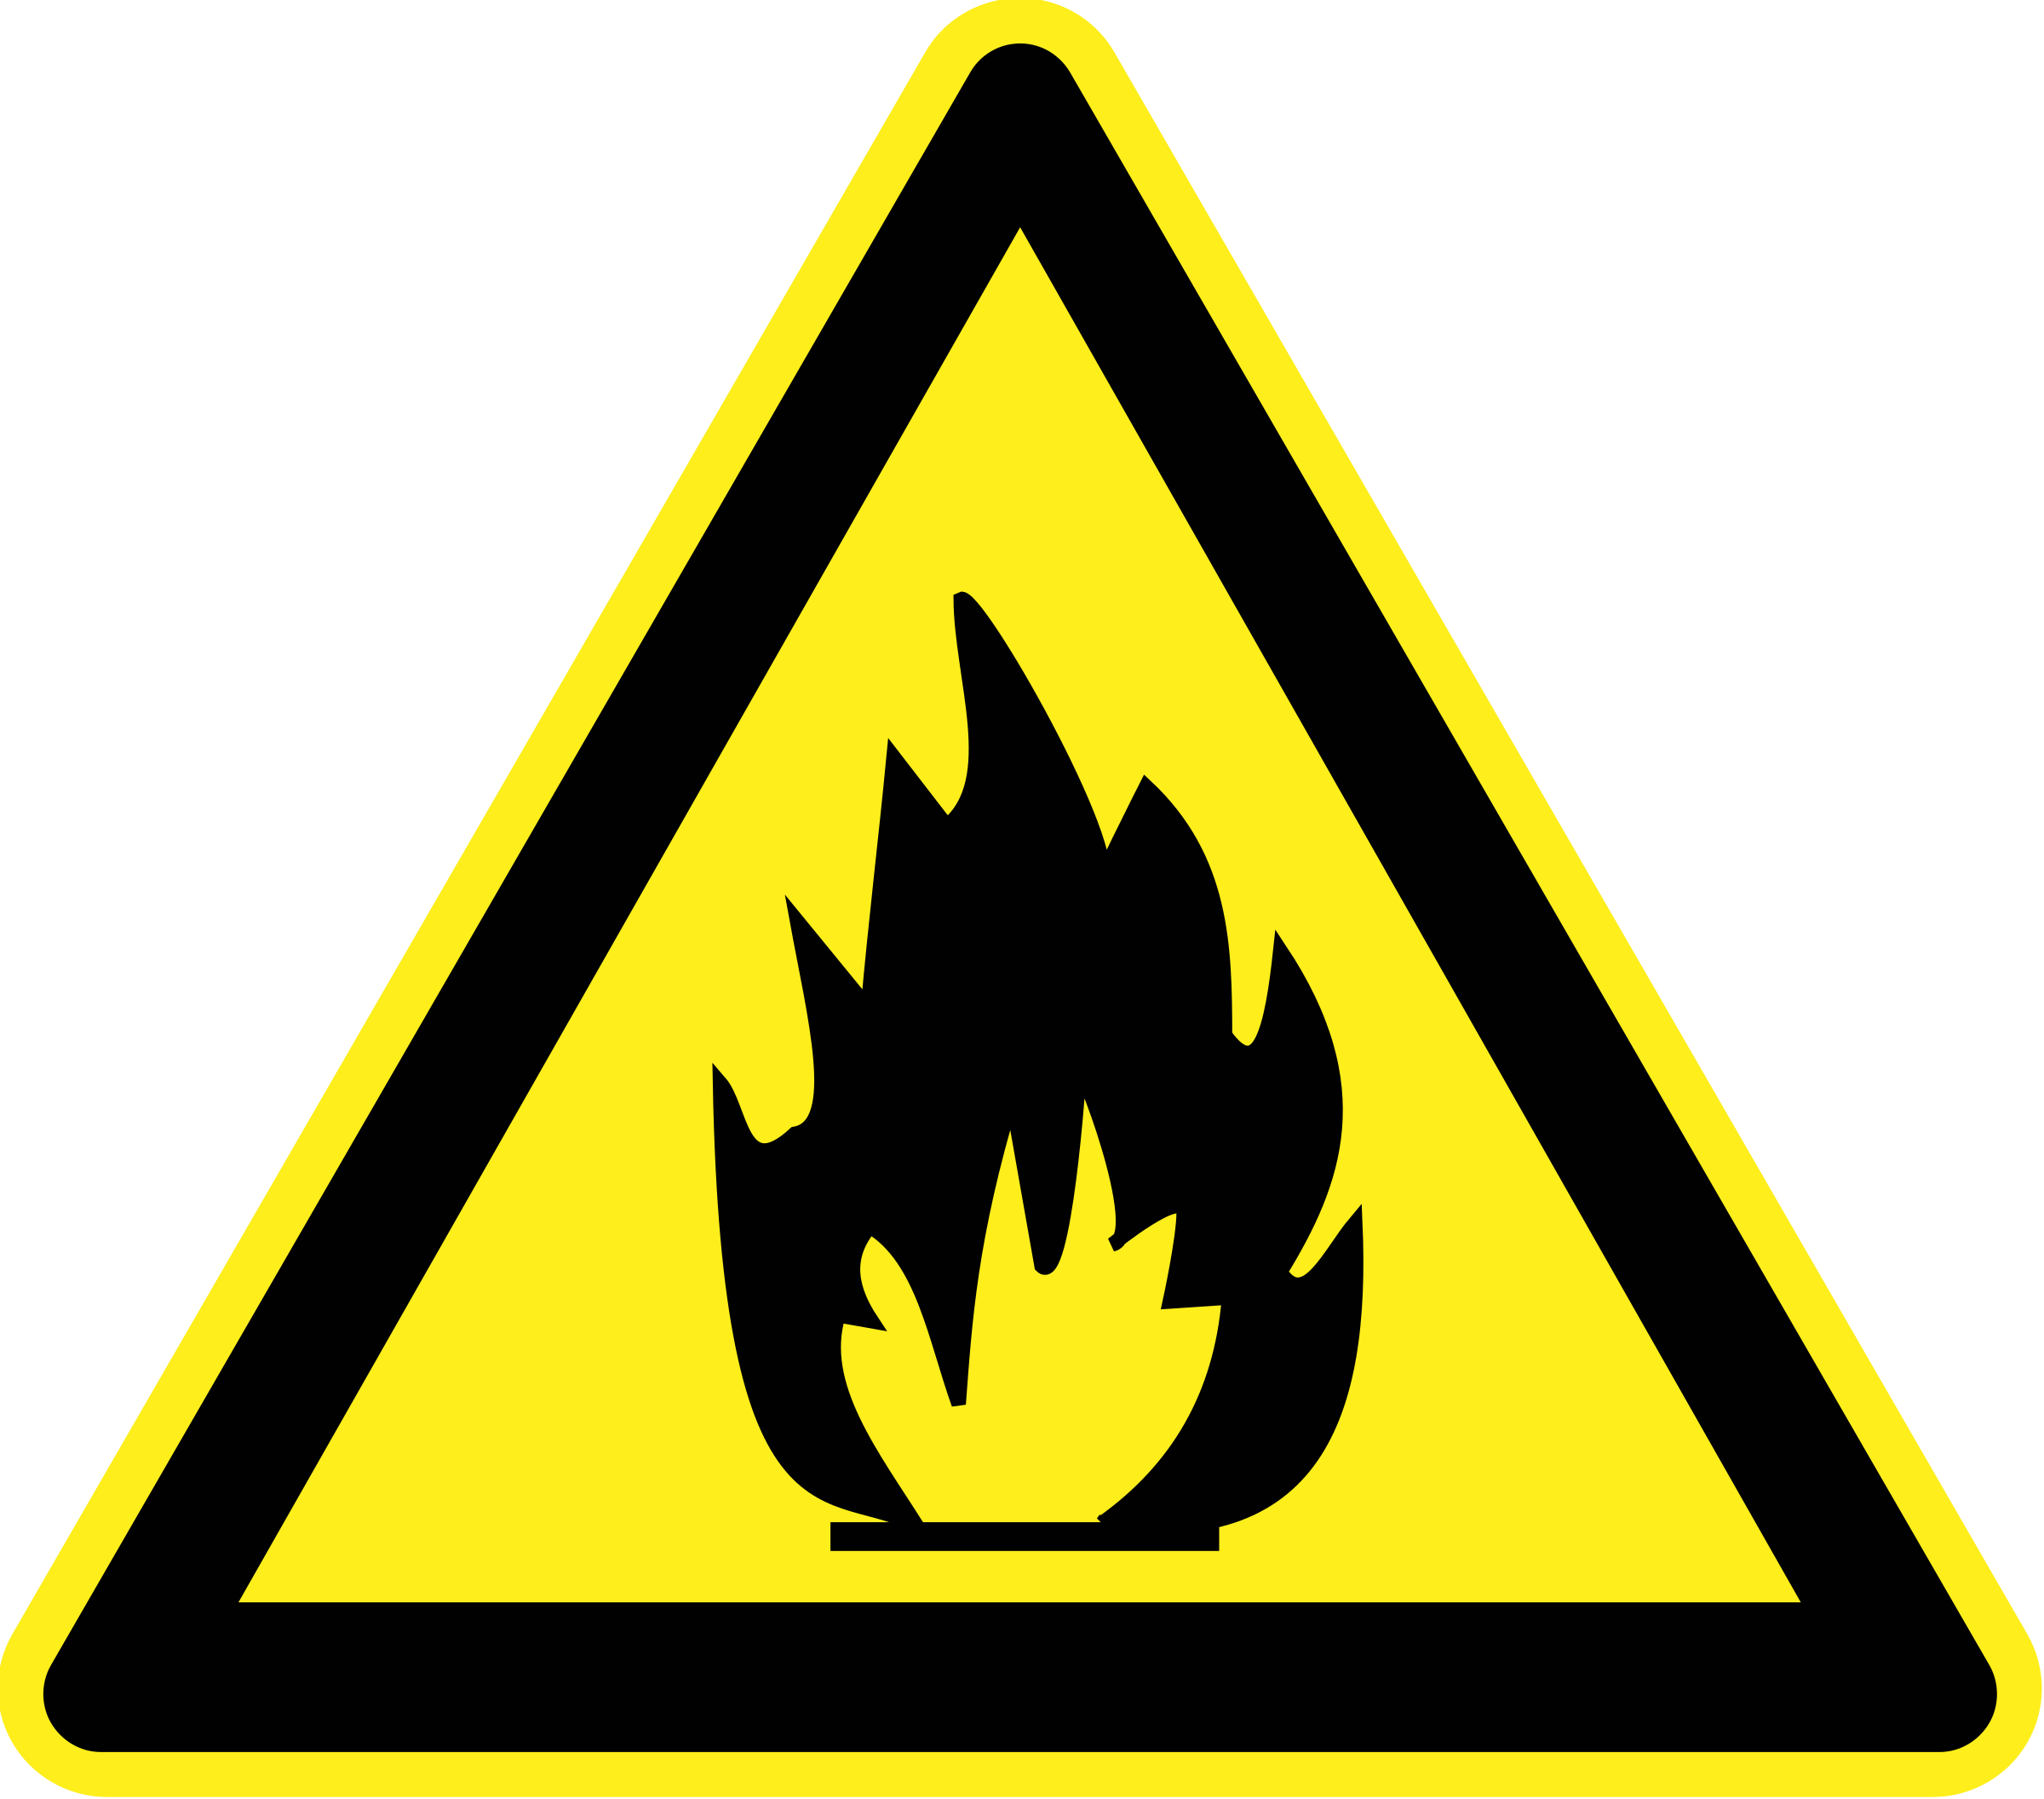 Hazard Symbol Fire Safety Warning Sign Png Clipart Area | Images and ...